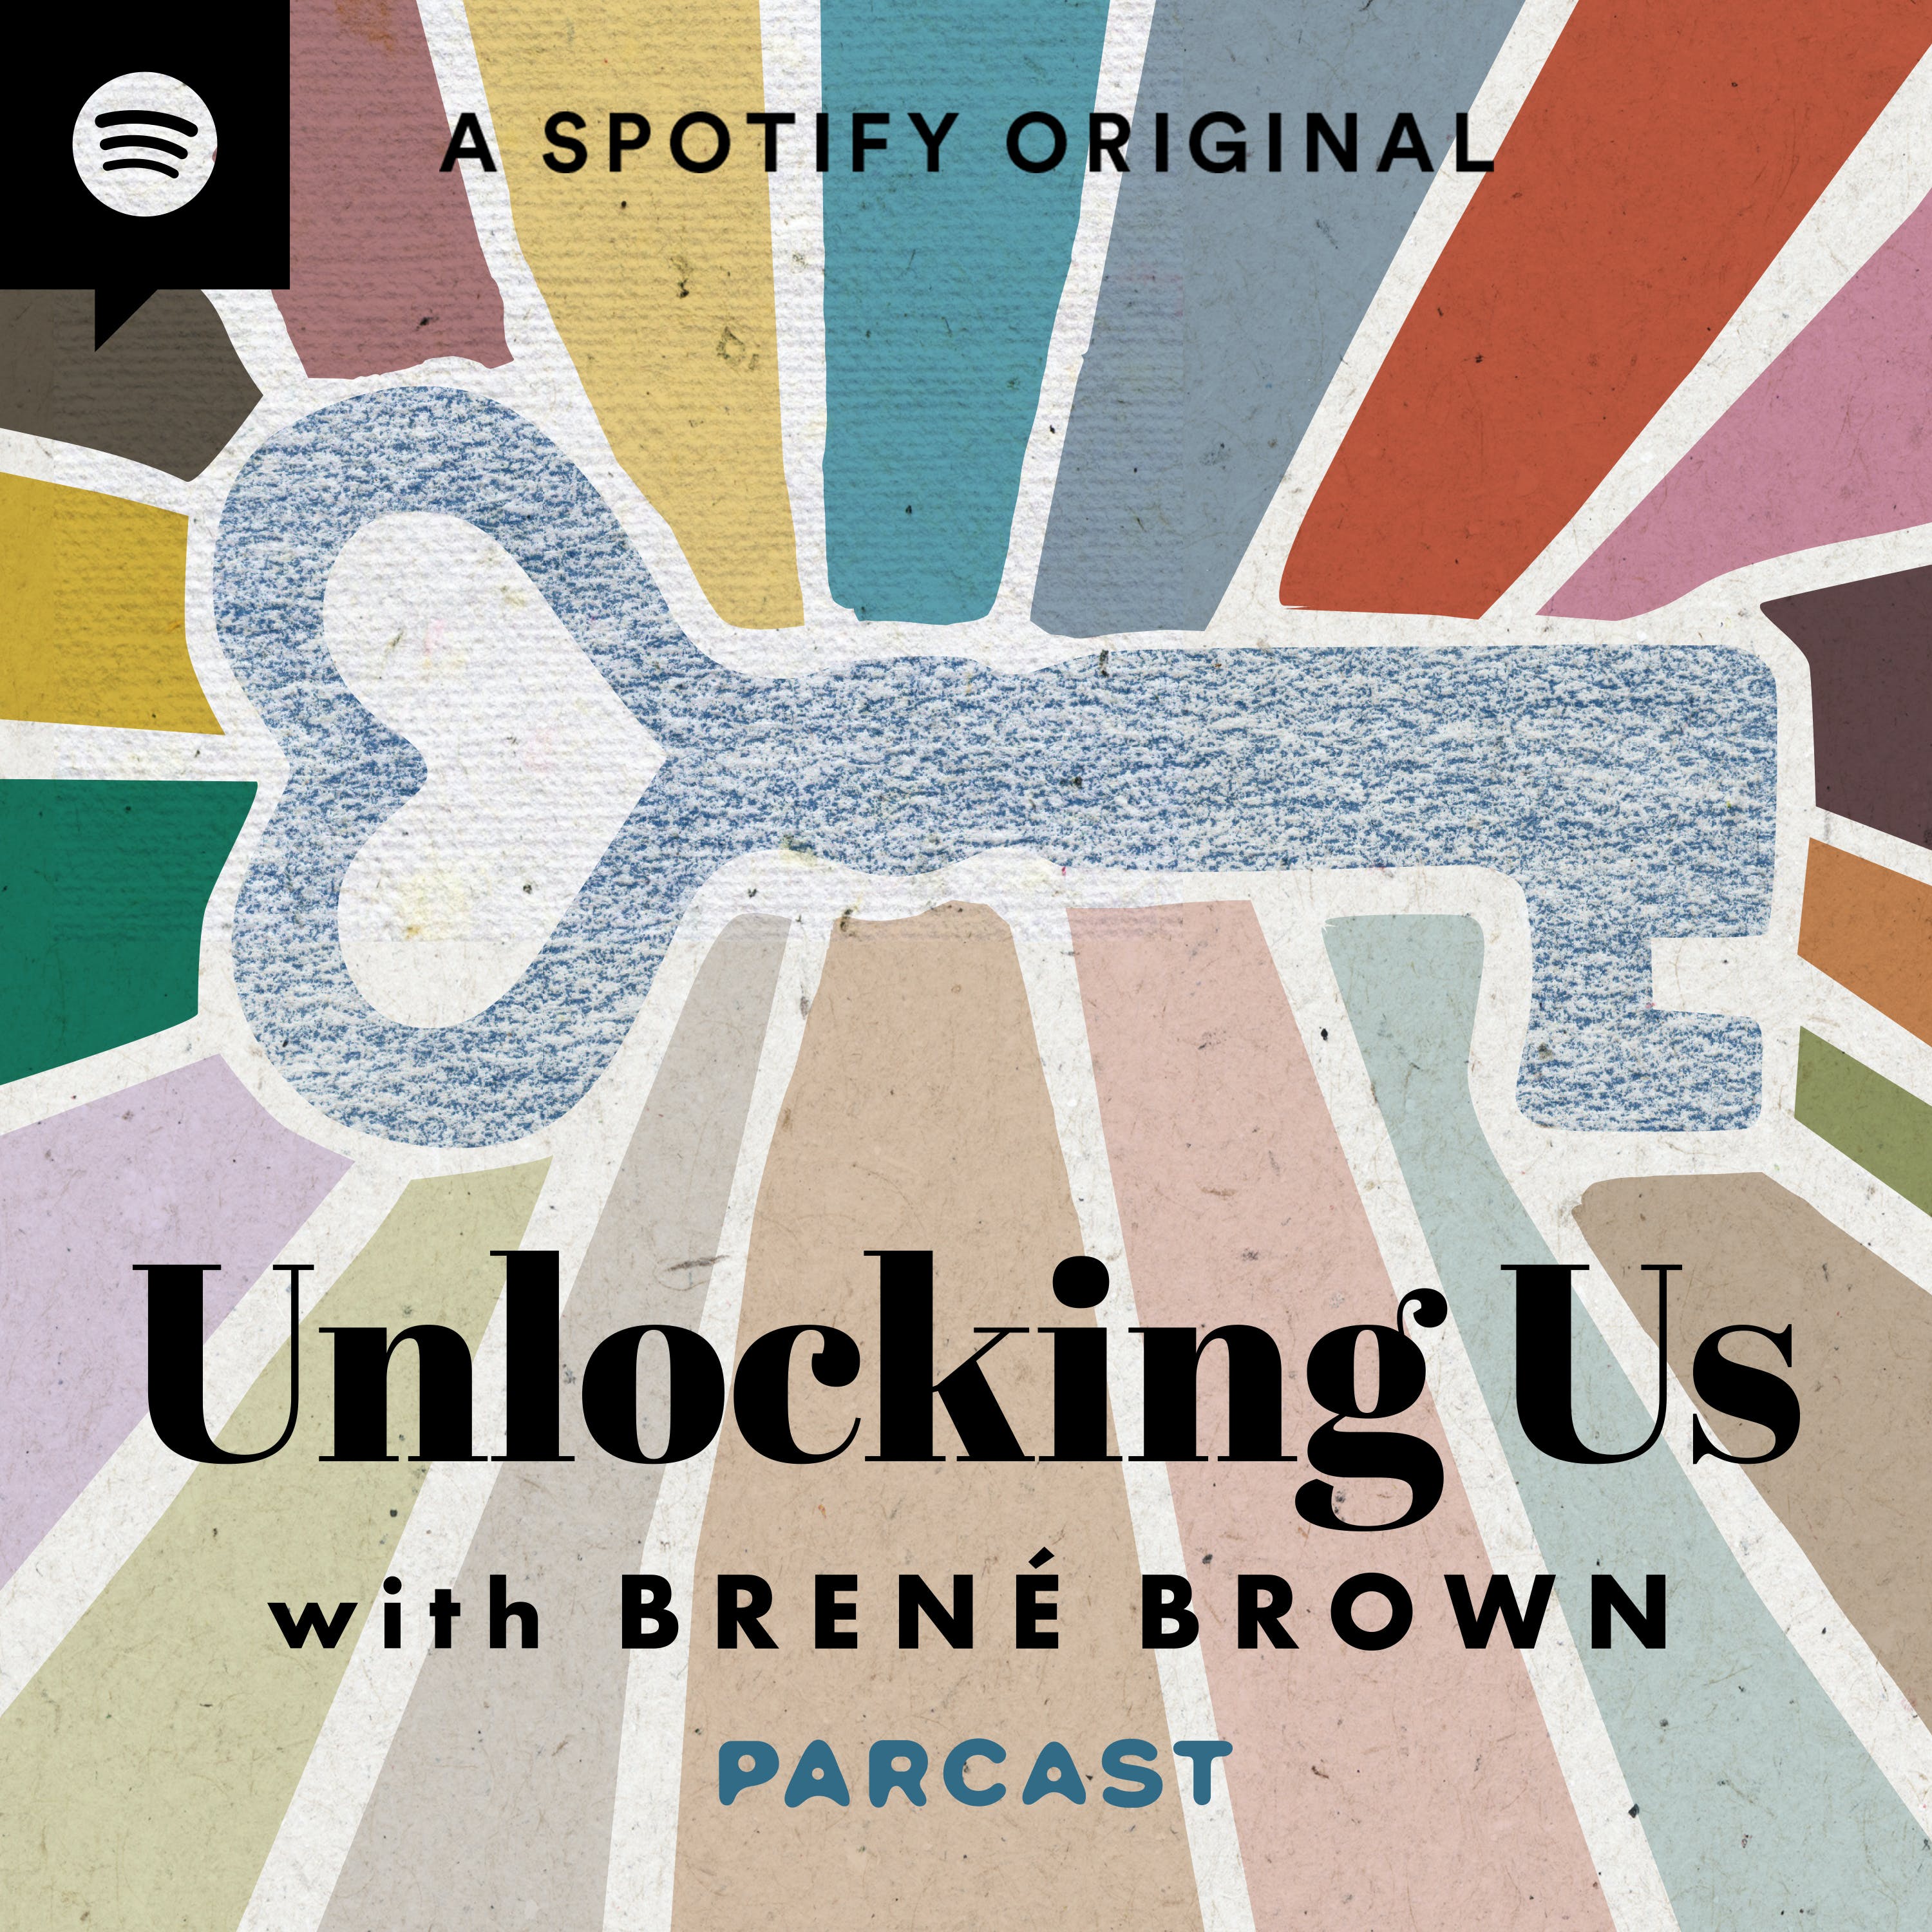 Brené with Tim Ferriss and Dax Shepard on Podcasting, Daily Practices, and the Long and Winding Path to Healing